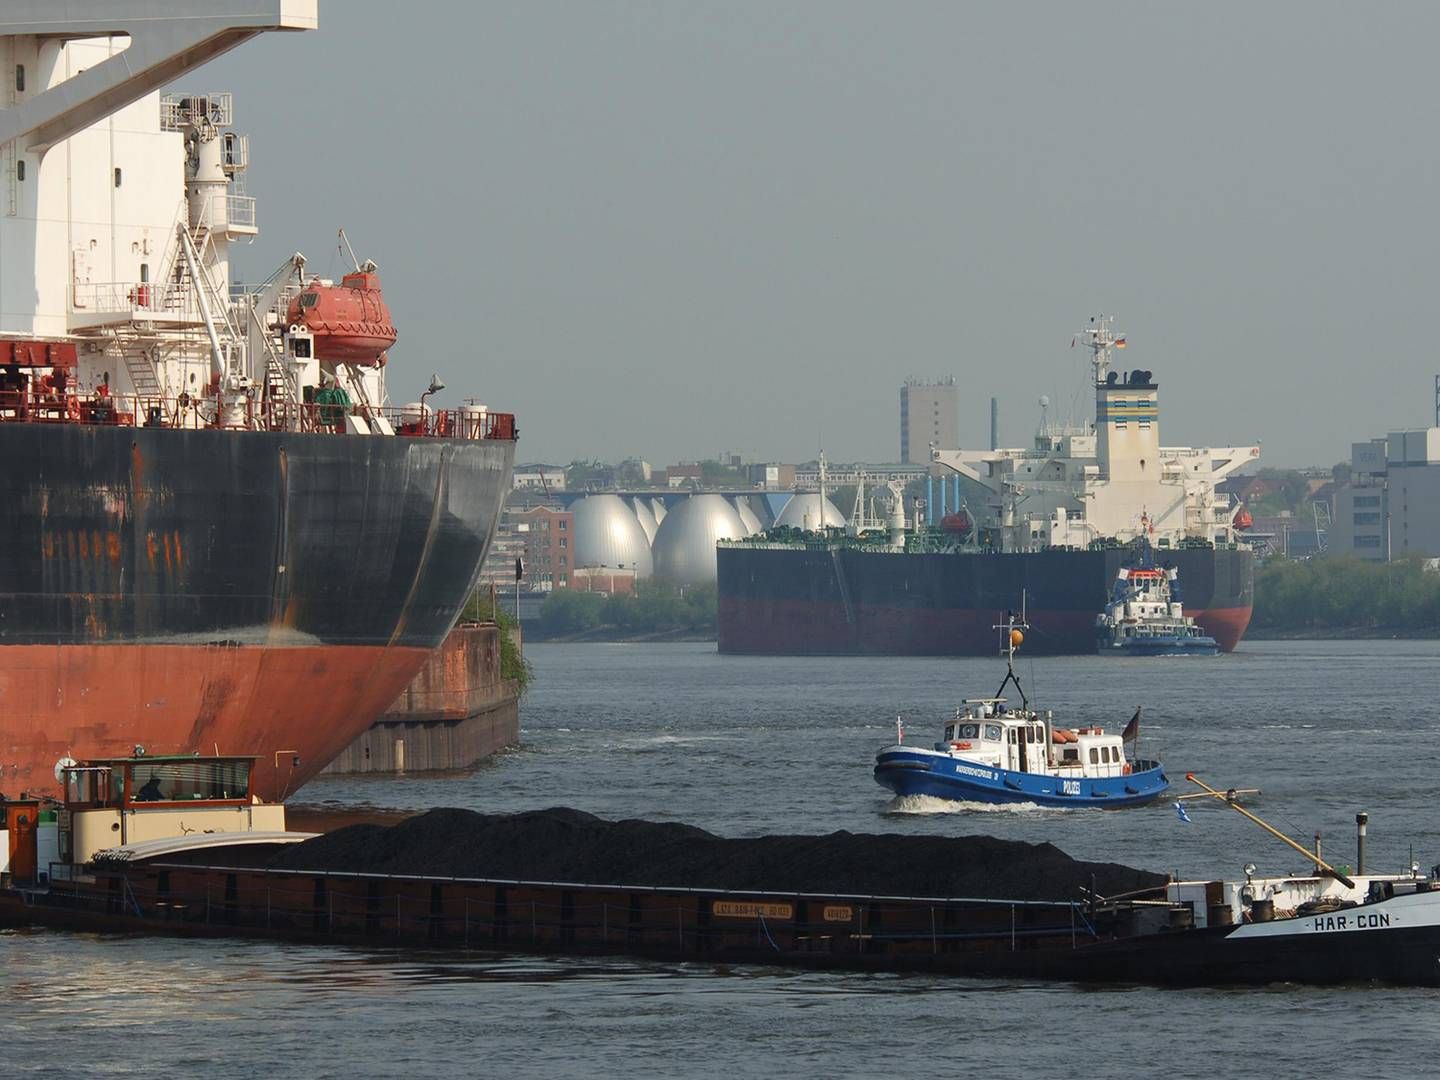 File photo of the Port of Hamburg. None of the ships in the photo are related to the scrubber fine reported. | Photo: PR/Port of Hamburg/Michael Lidner